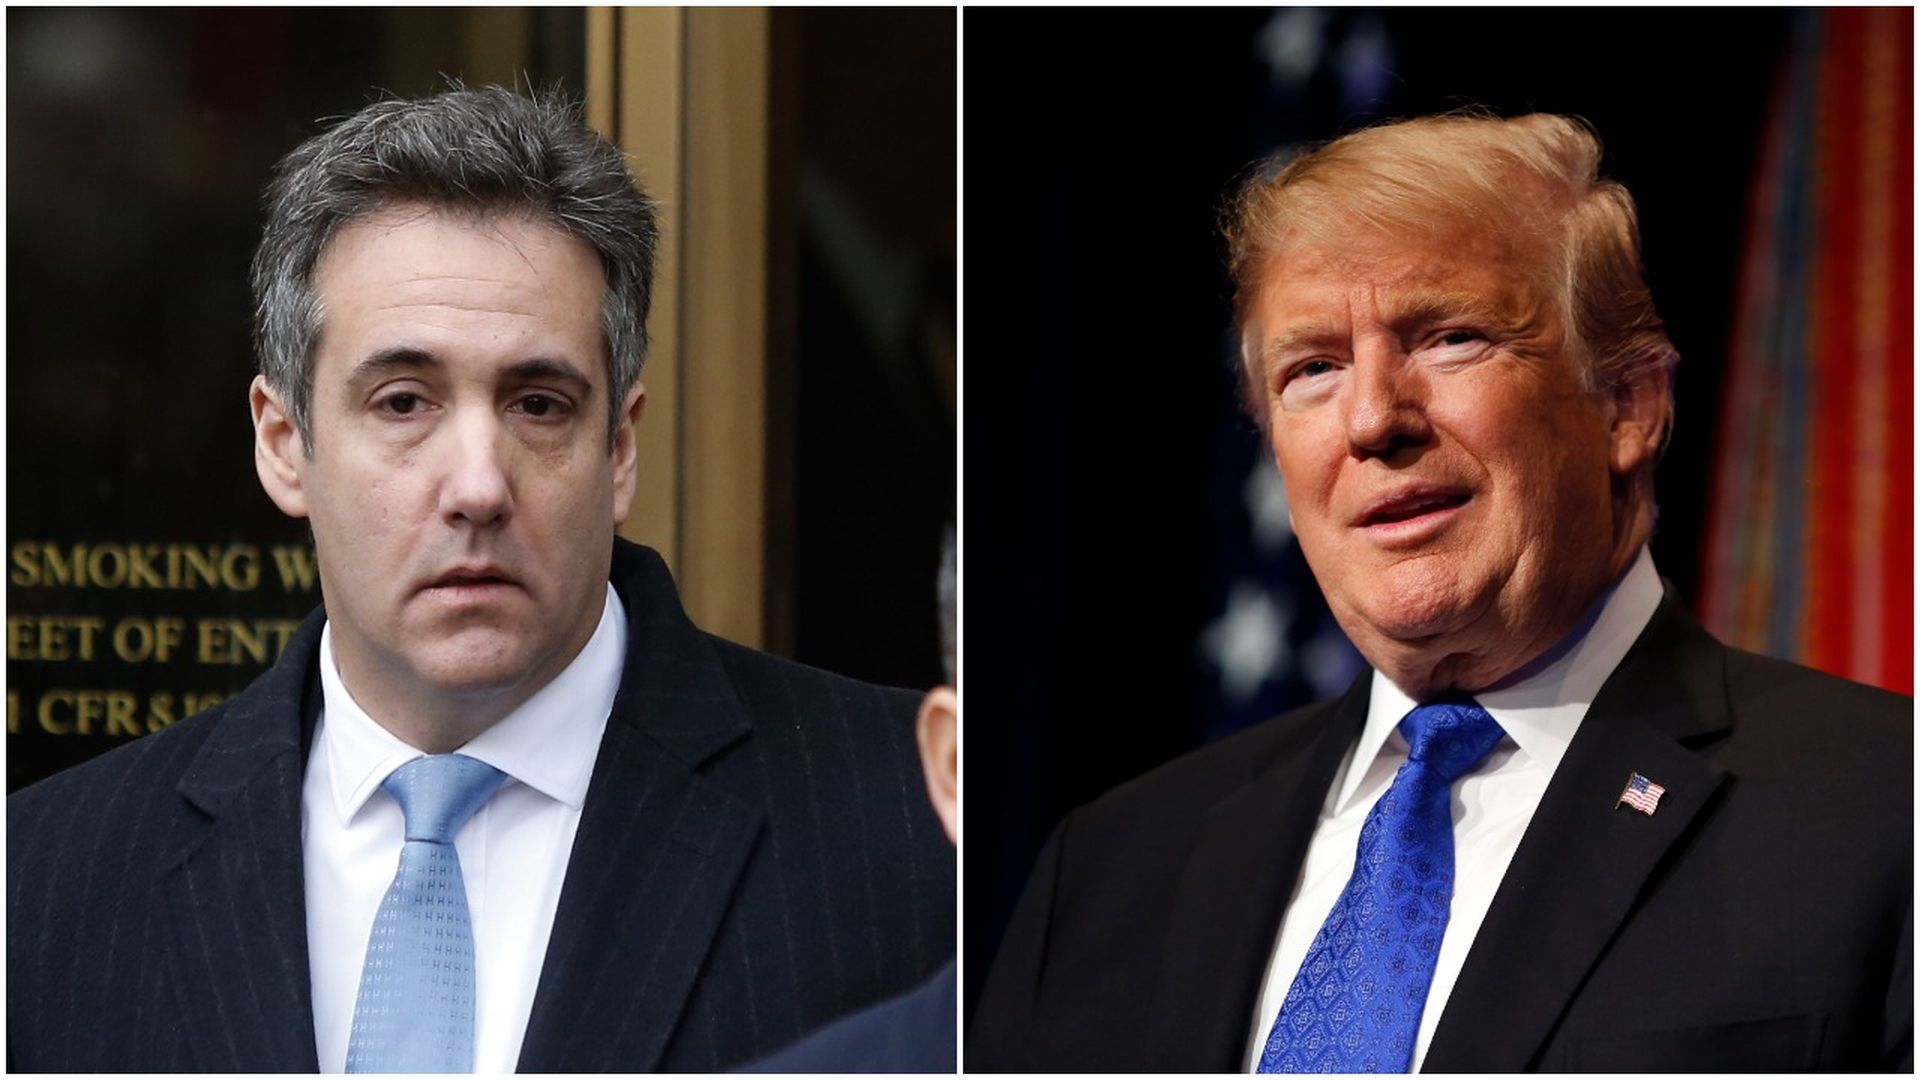 Cohen and Trump